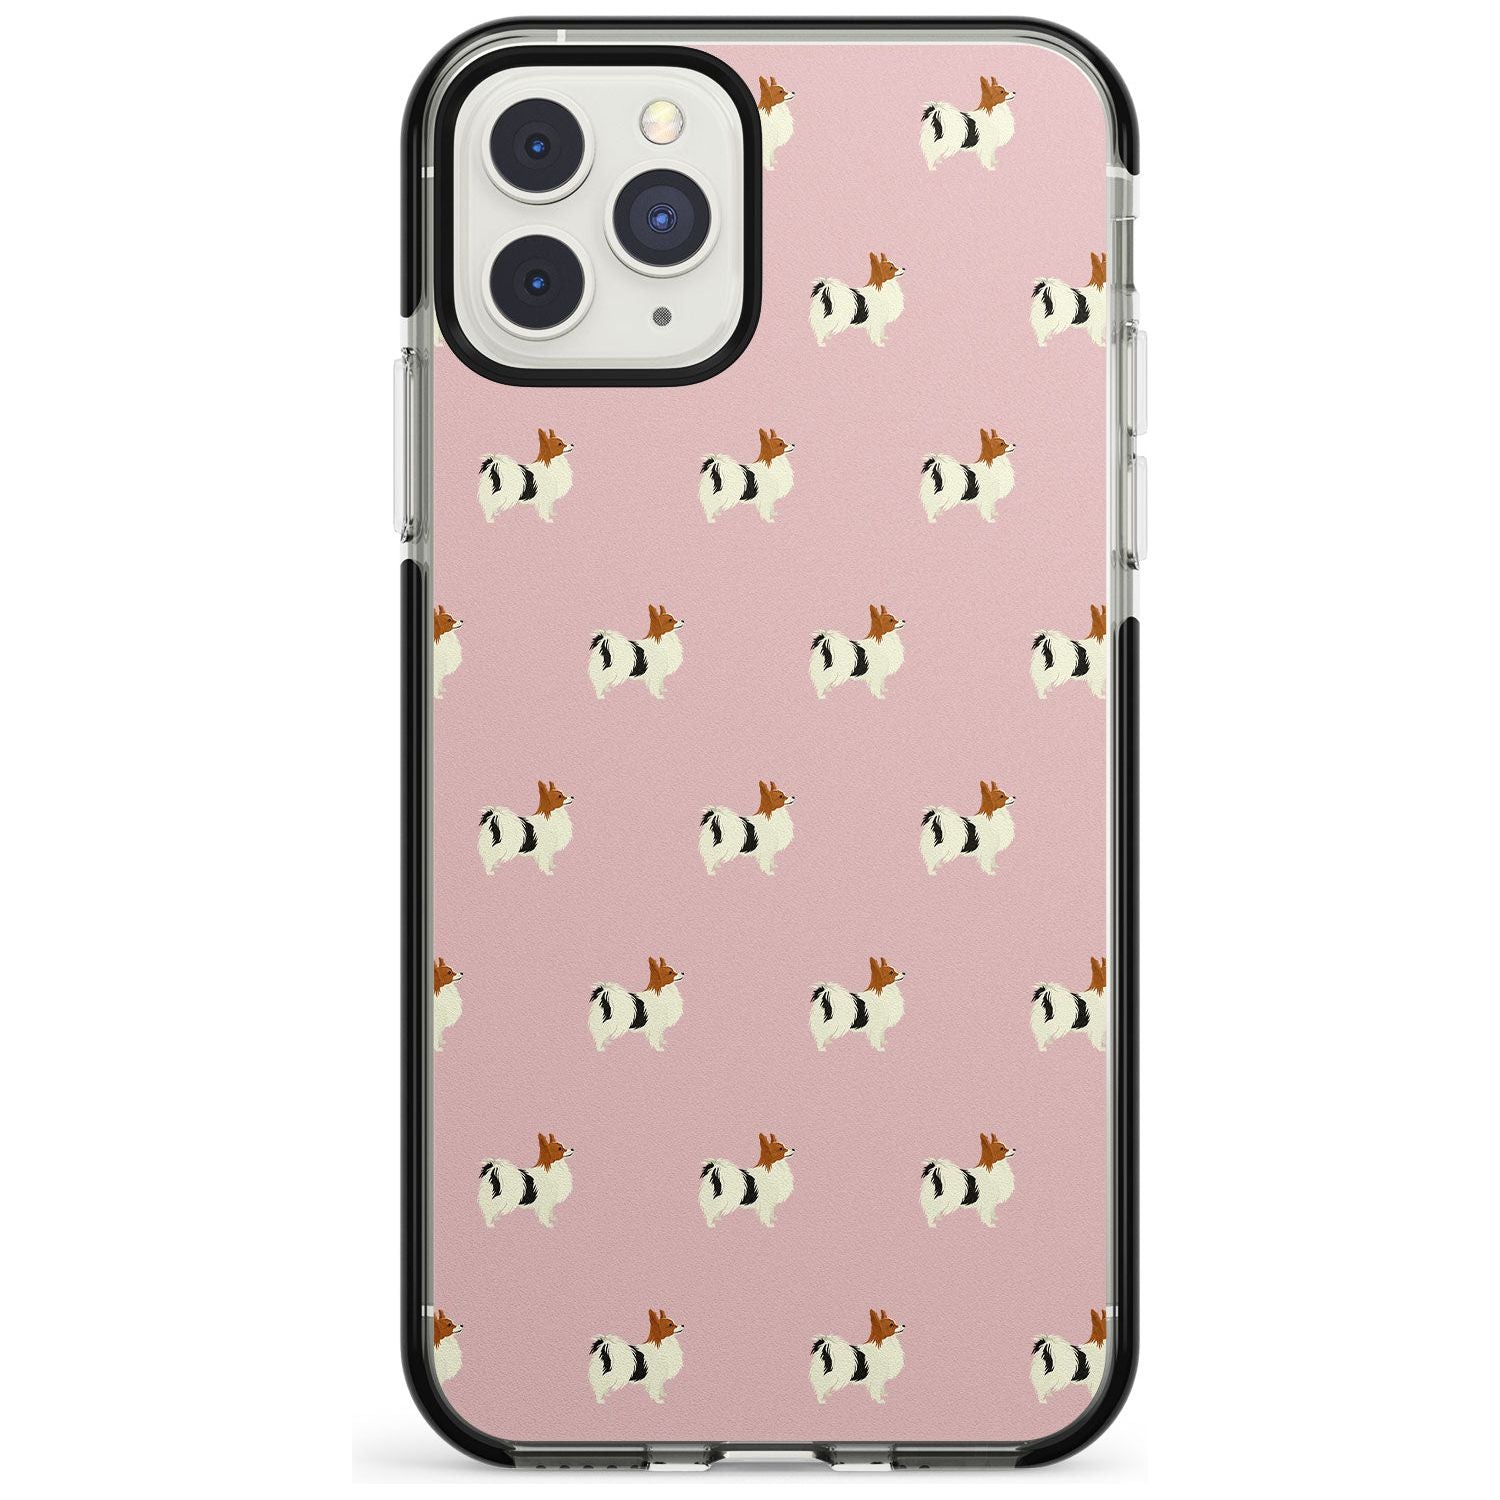 Papillon Dog Pattern Black Impact Phone Case for iPhone 11 Pro Max